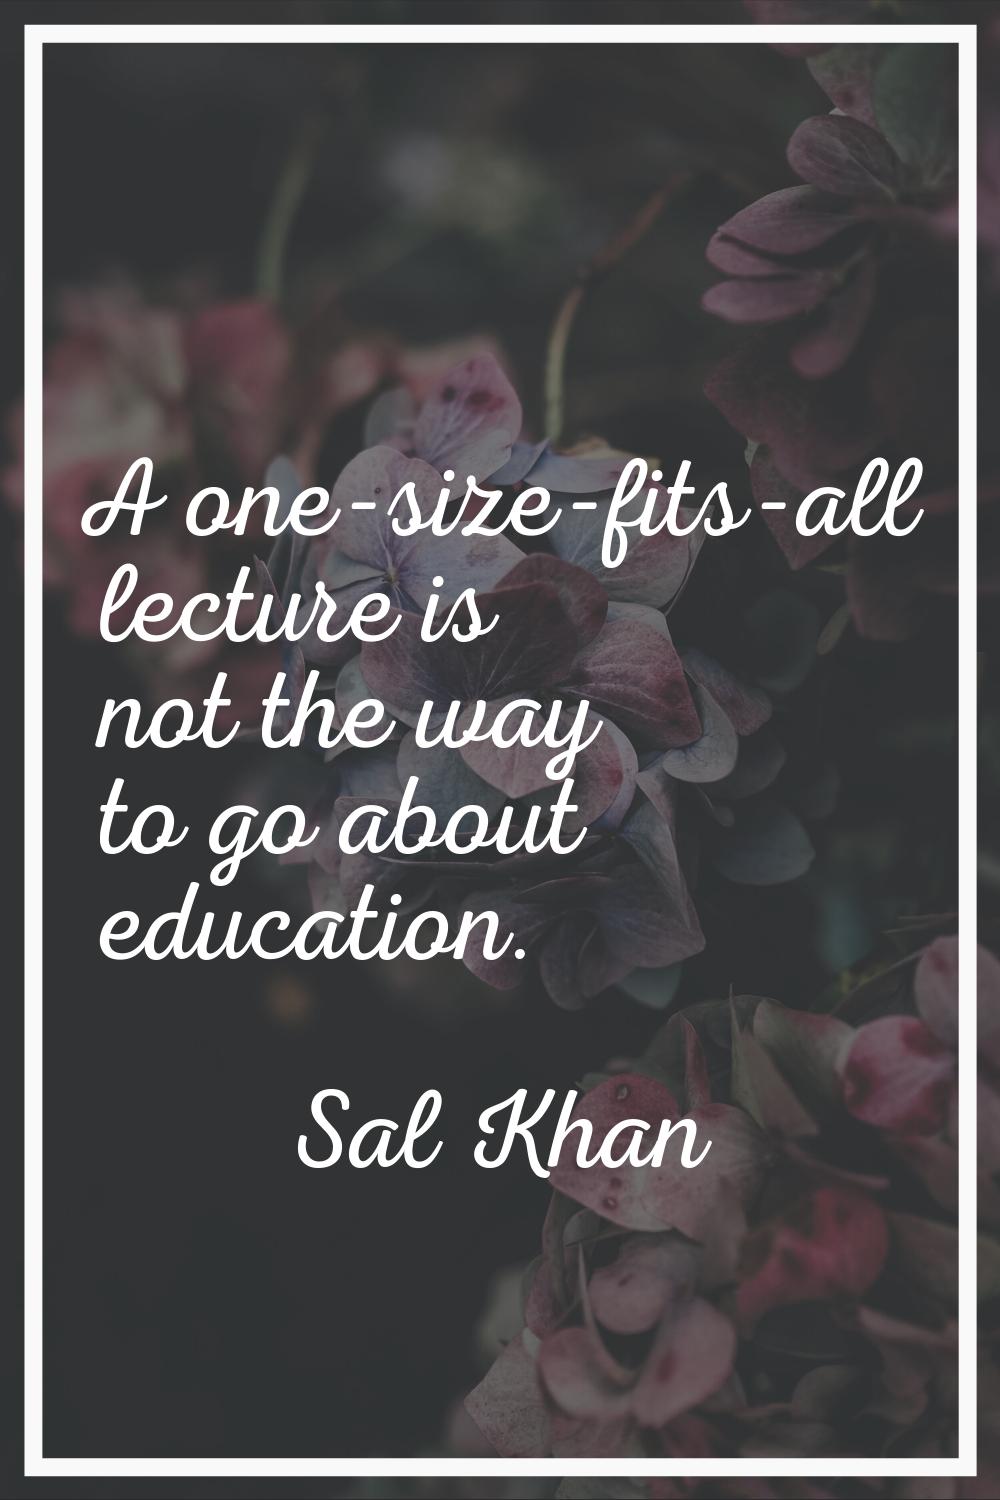 A one-size-fits-all lecture is not the way to go about education.